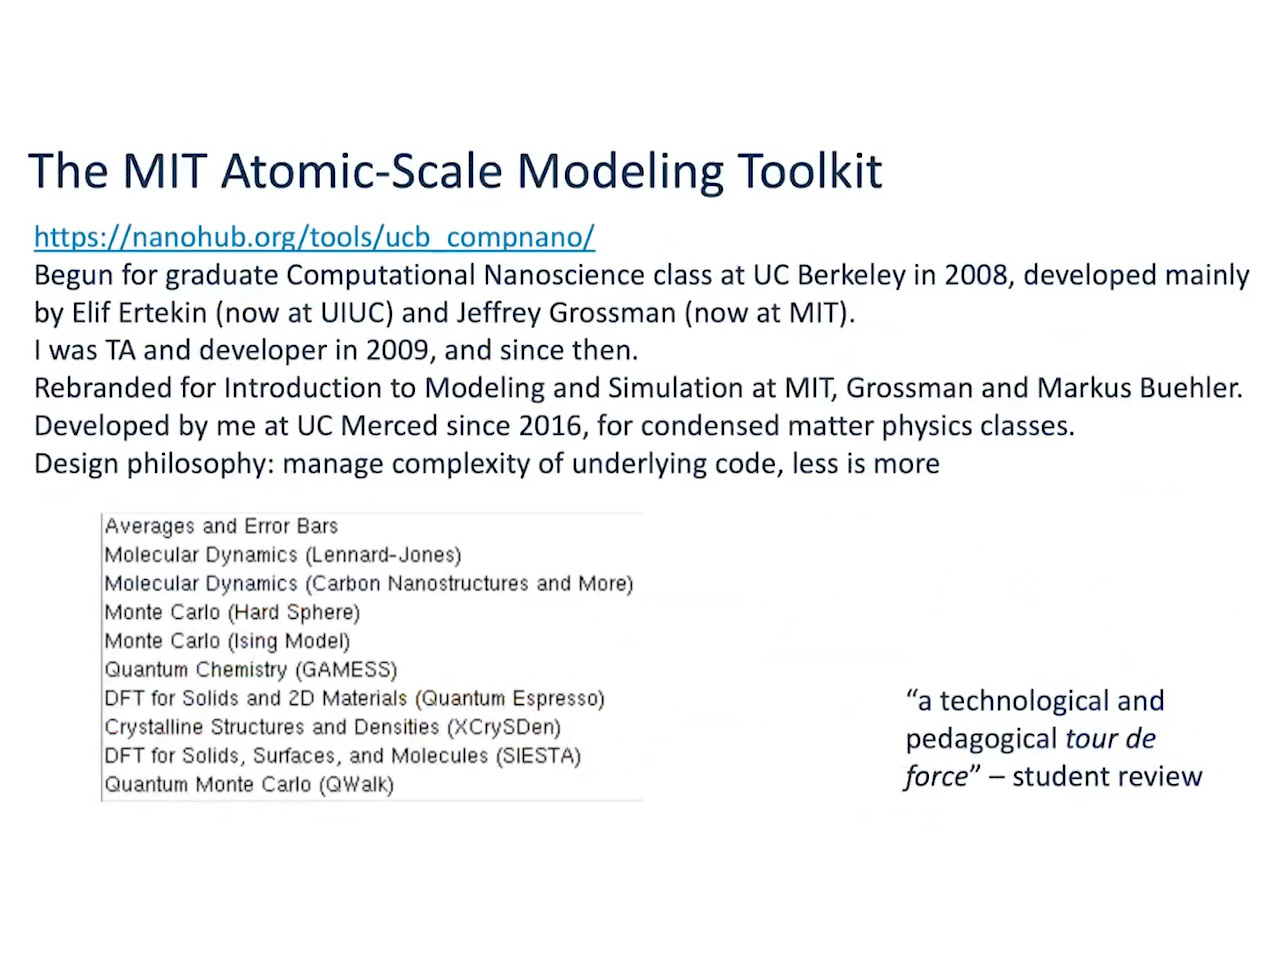 The MIT Atomic-Scale Modeling Toolkit